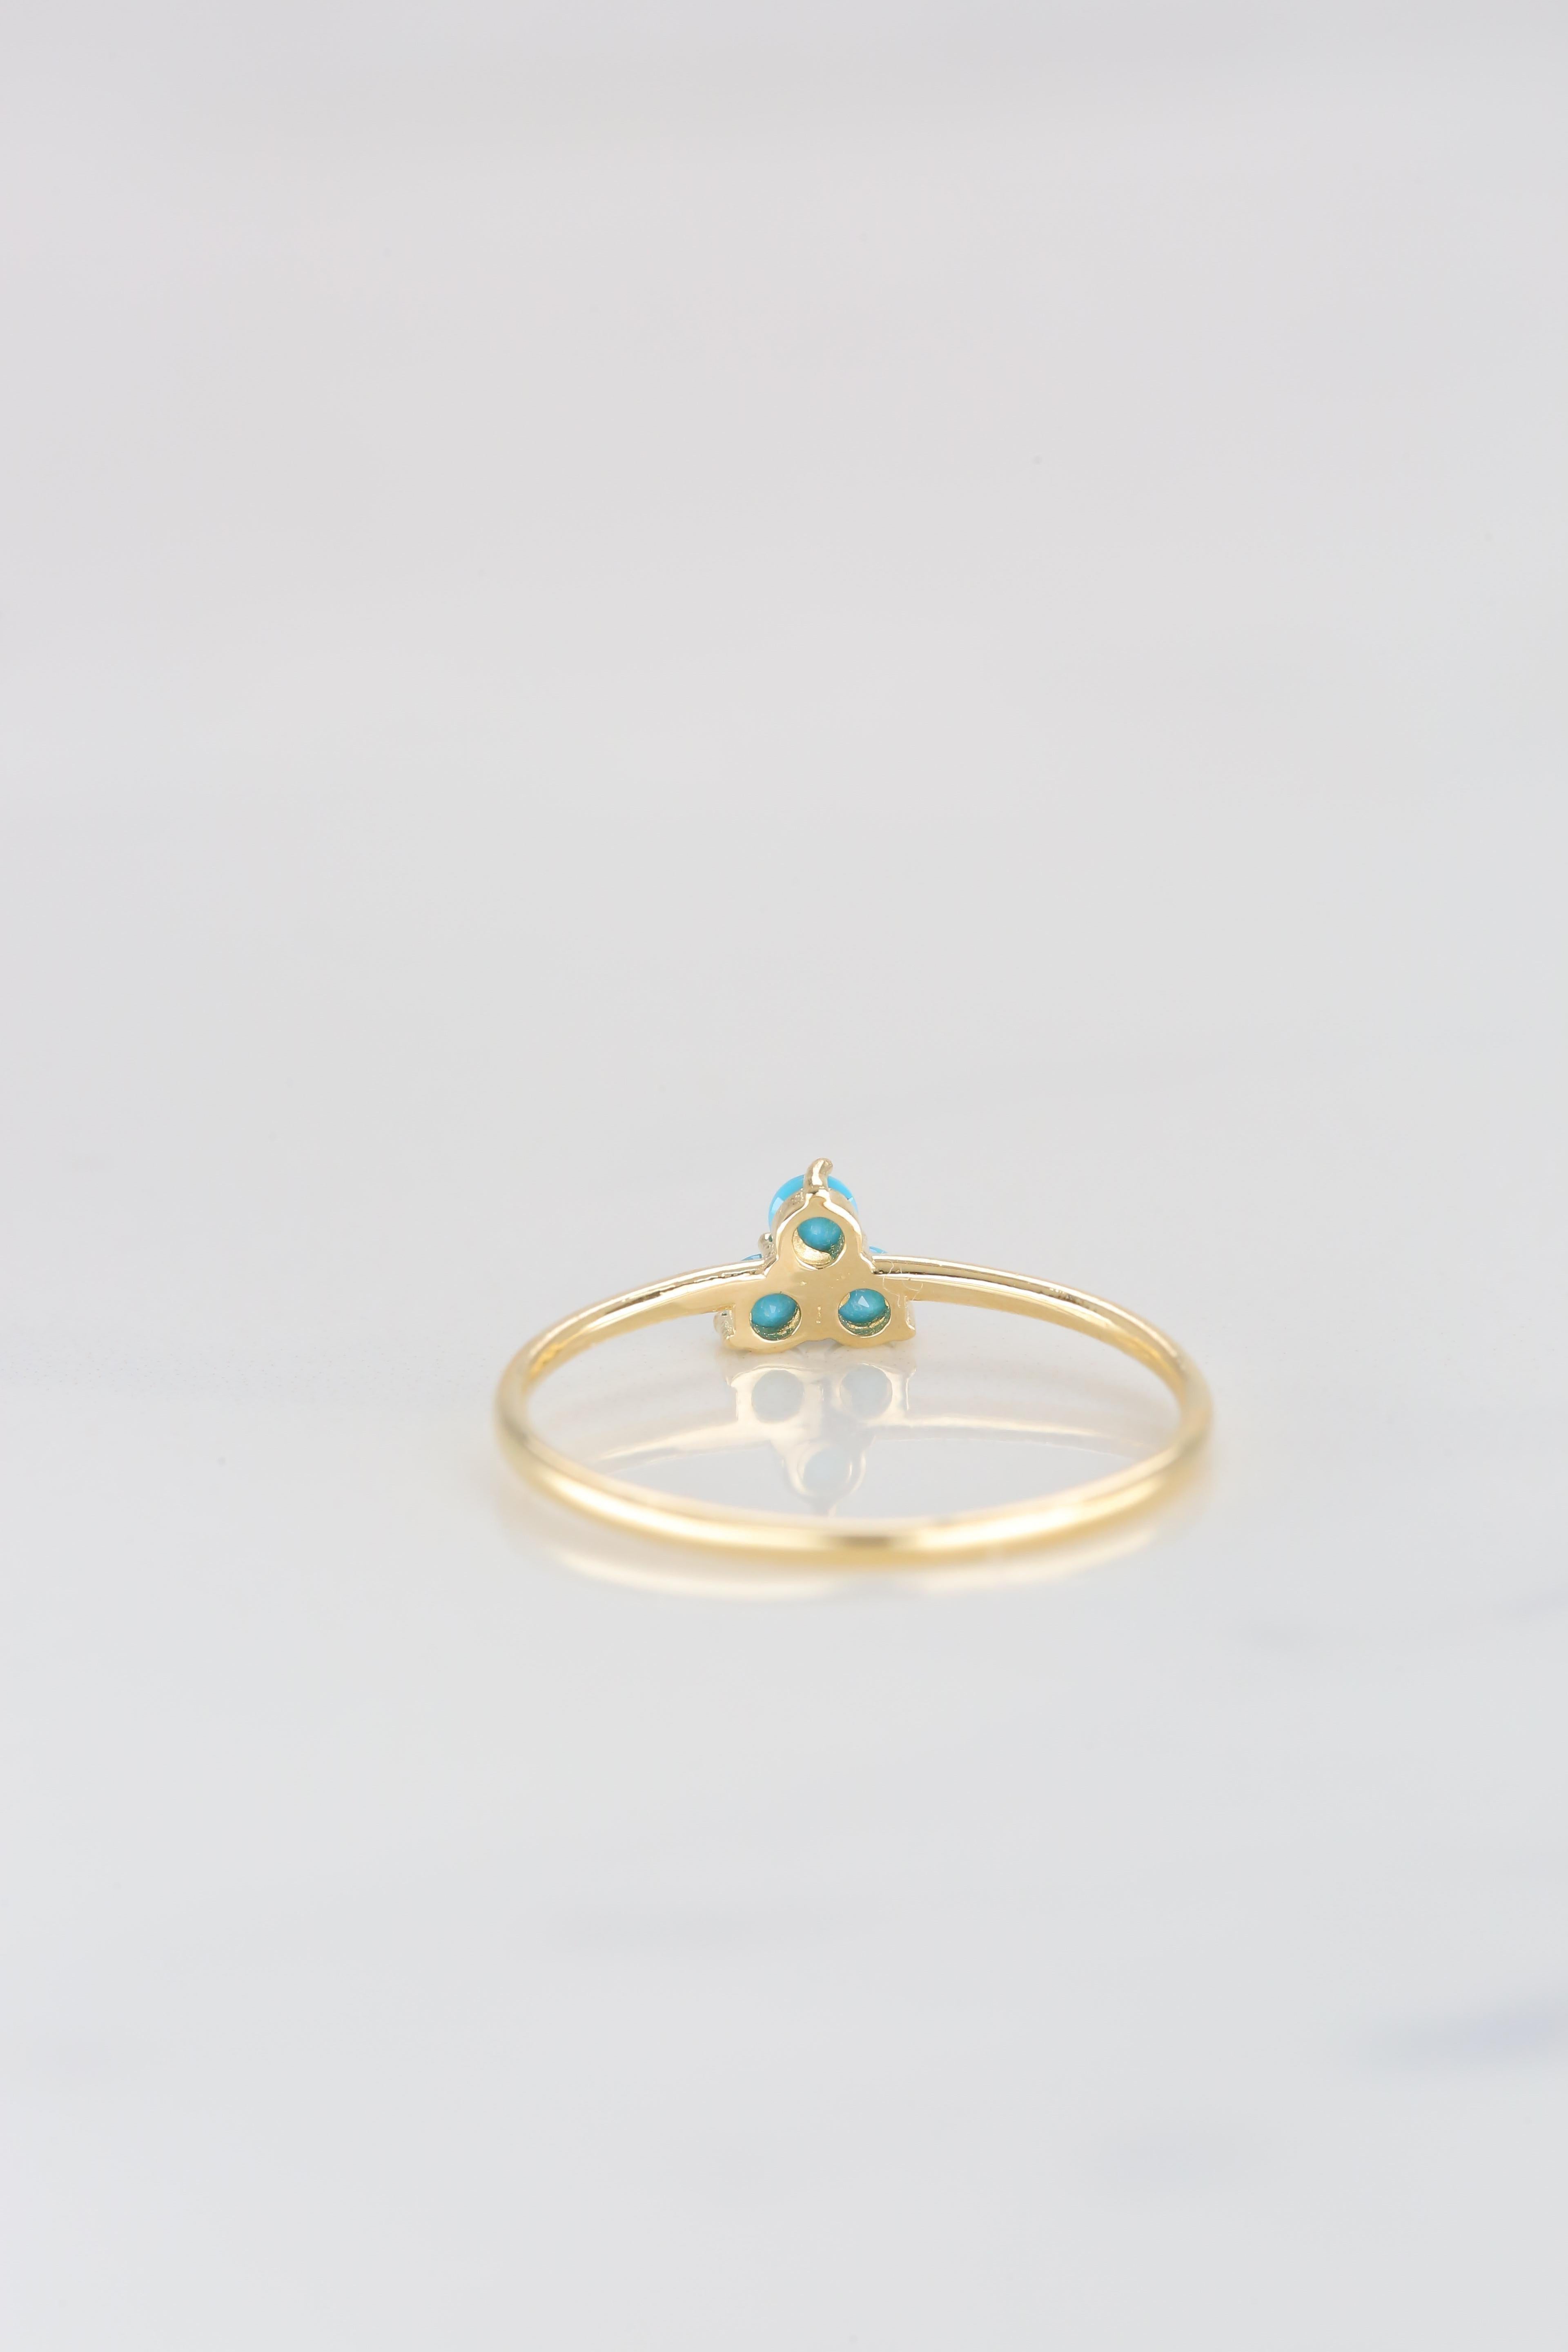 For Sale:  Dainty Turquoise Ring, 14K Dainty Gold Turquoise Ring, Gold Turquoise Ring 8